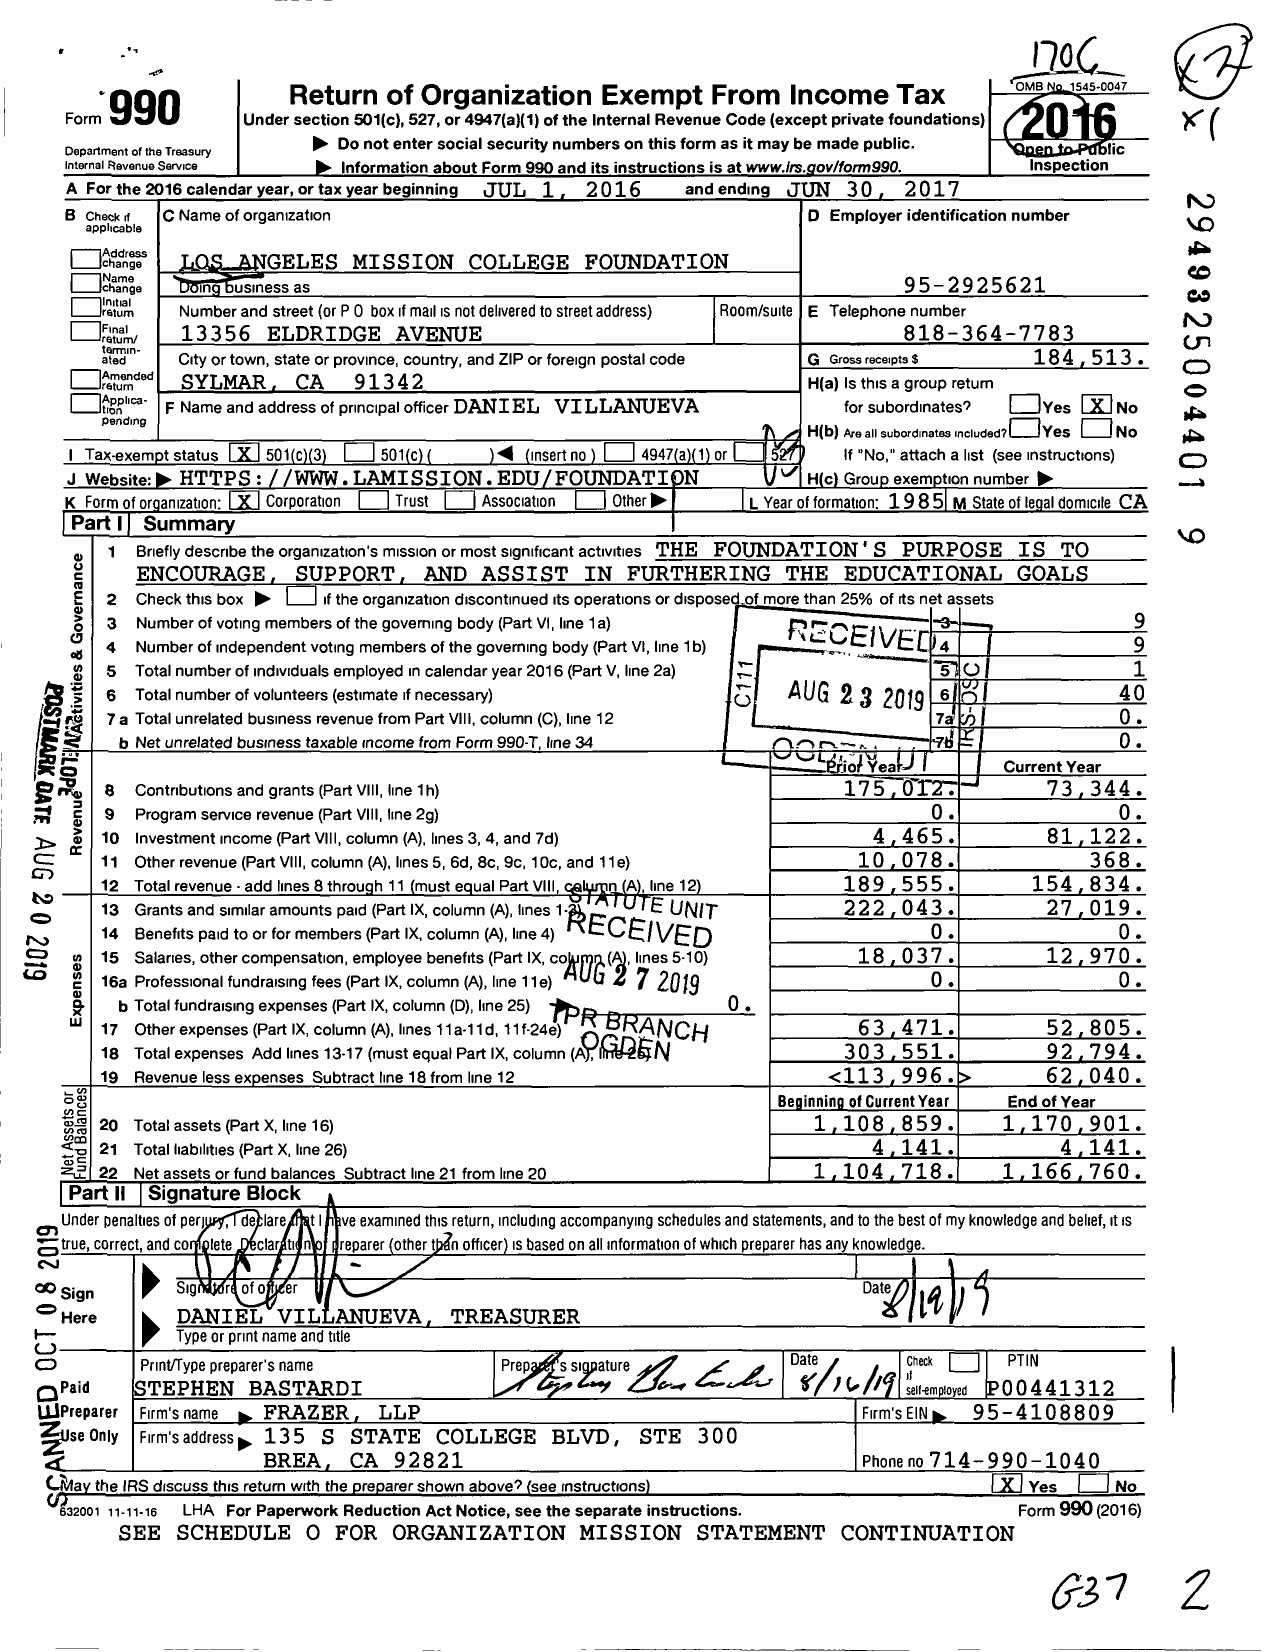 Image of first page of 2016 Form 990 for Los Angeles Mission College Foundation